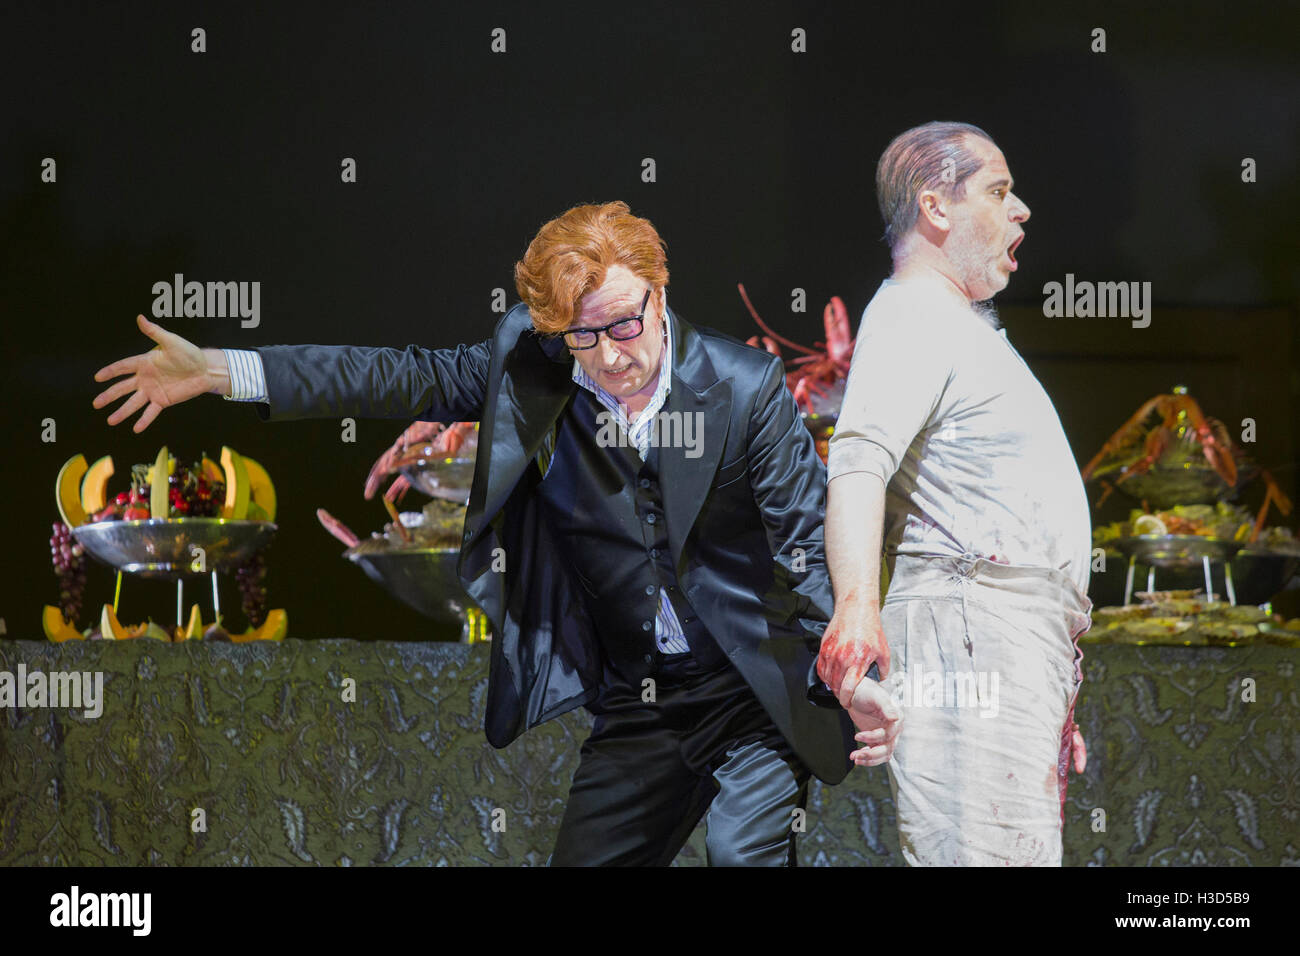 London, UK. 28 September 2016. Pictured: Clive Bayley and James Creswell. Dress rehearsal of the Mozart opera Don Giovanni at the London Coliseum. The English National Opera production directed by Richard Jones runs for 9 performances from 30 September to 26 October 2016. With Christopher Purves as Don Giovanni, Clive Bayley as Leporello, Caitlin Lynch as Donna Anna, Allan Clayton as Don Ottavio, Christine Rice as Donna Elvira, James Creswell as Commendatore, Mary Bevan as Zerlina and Nicholas Crawley as Masetto. Stock Photo